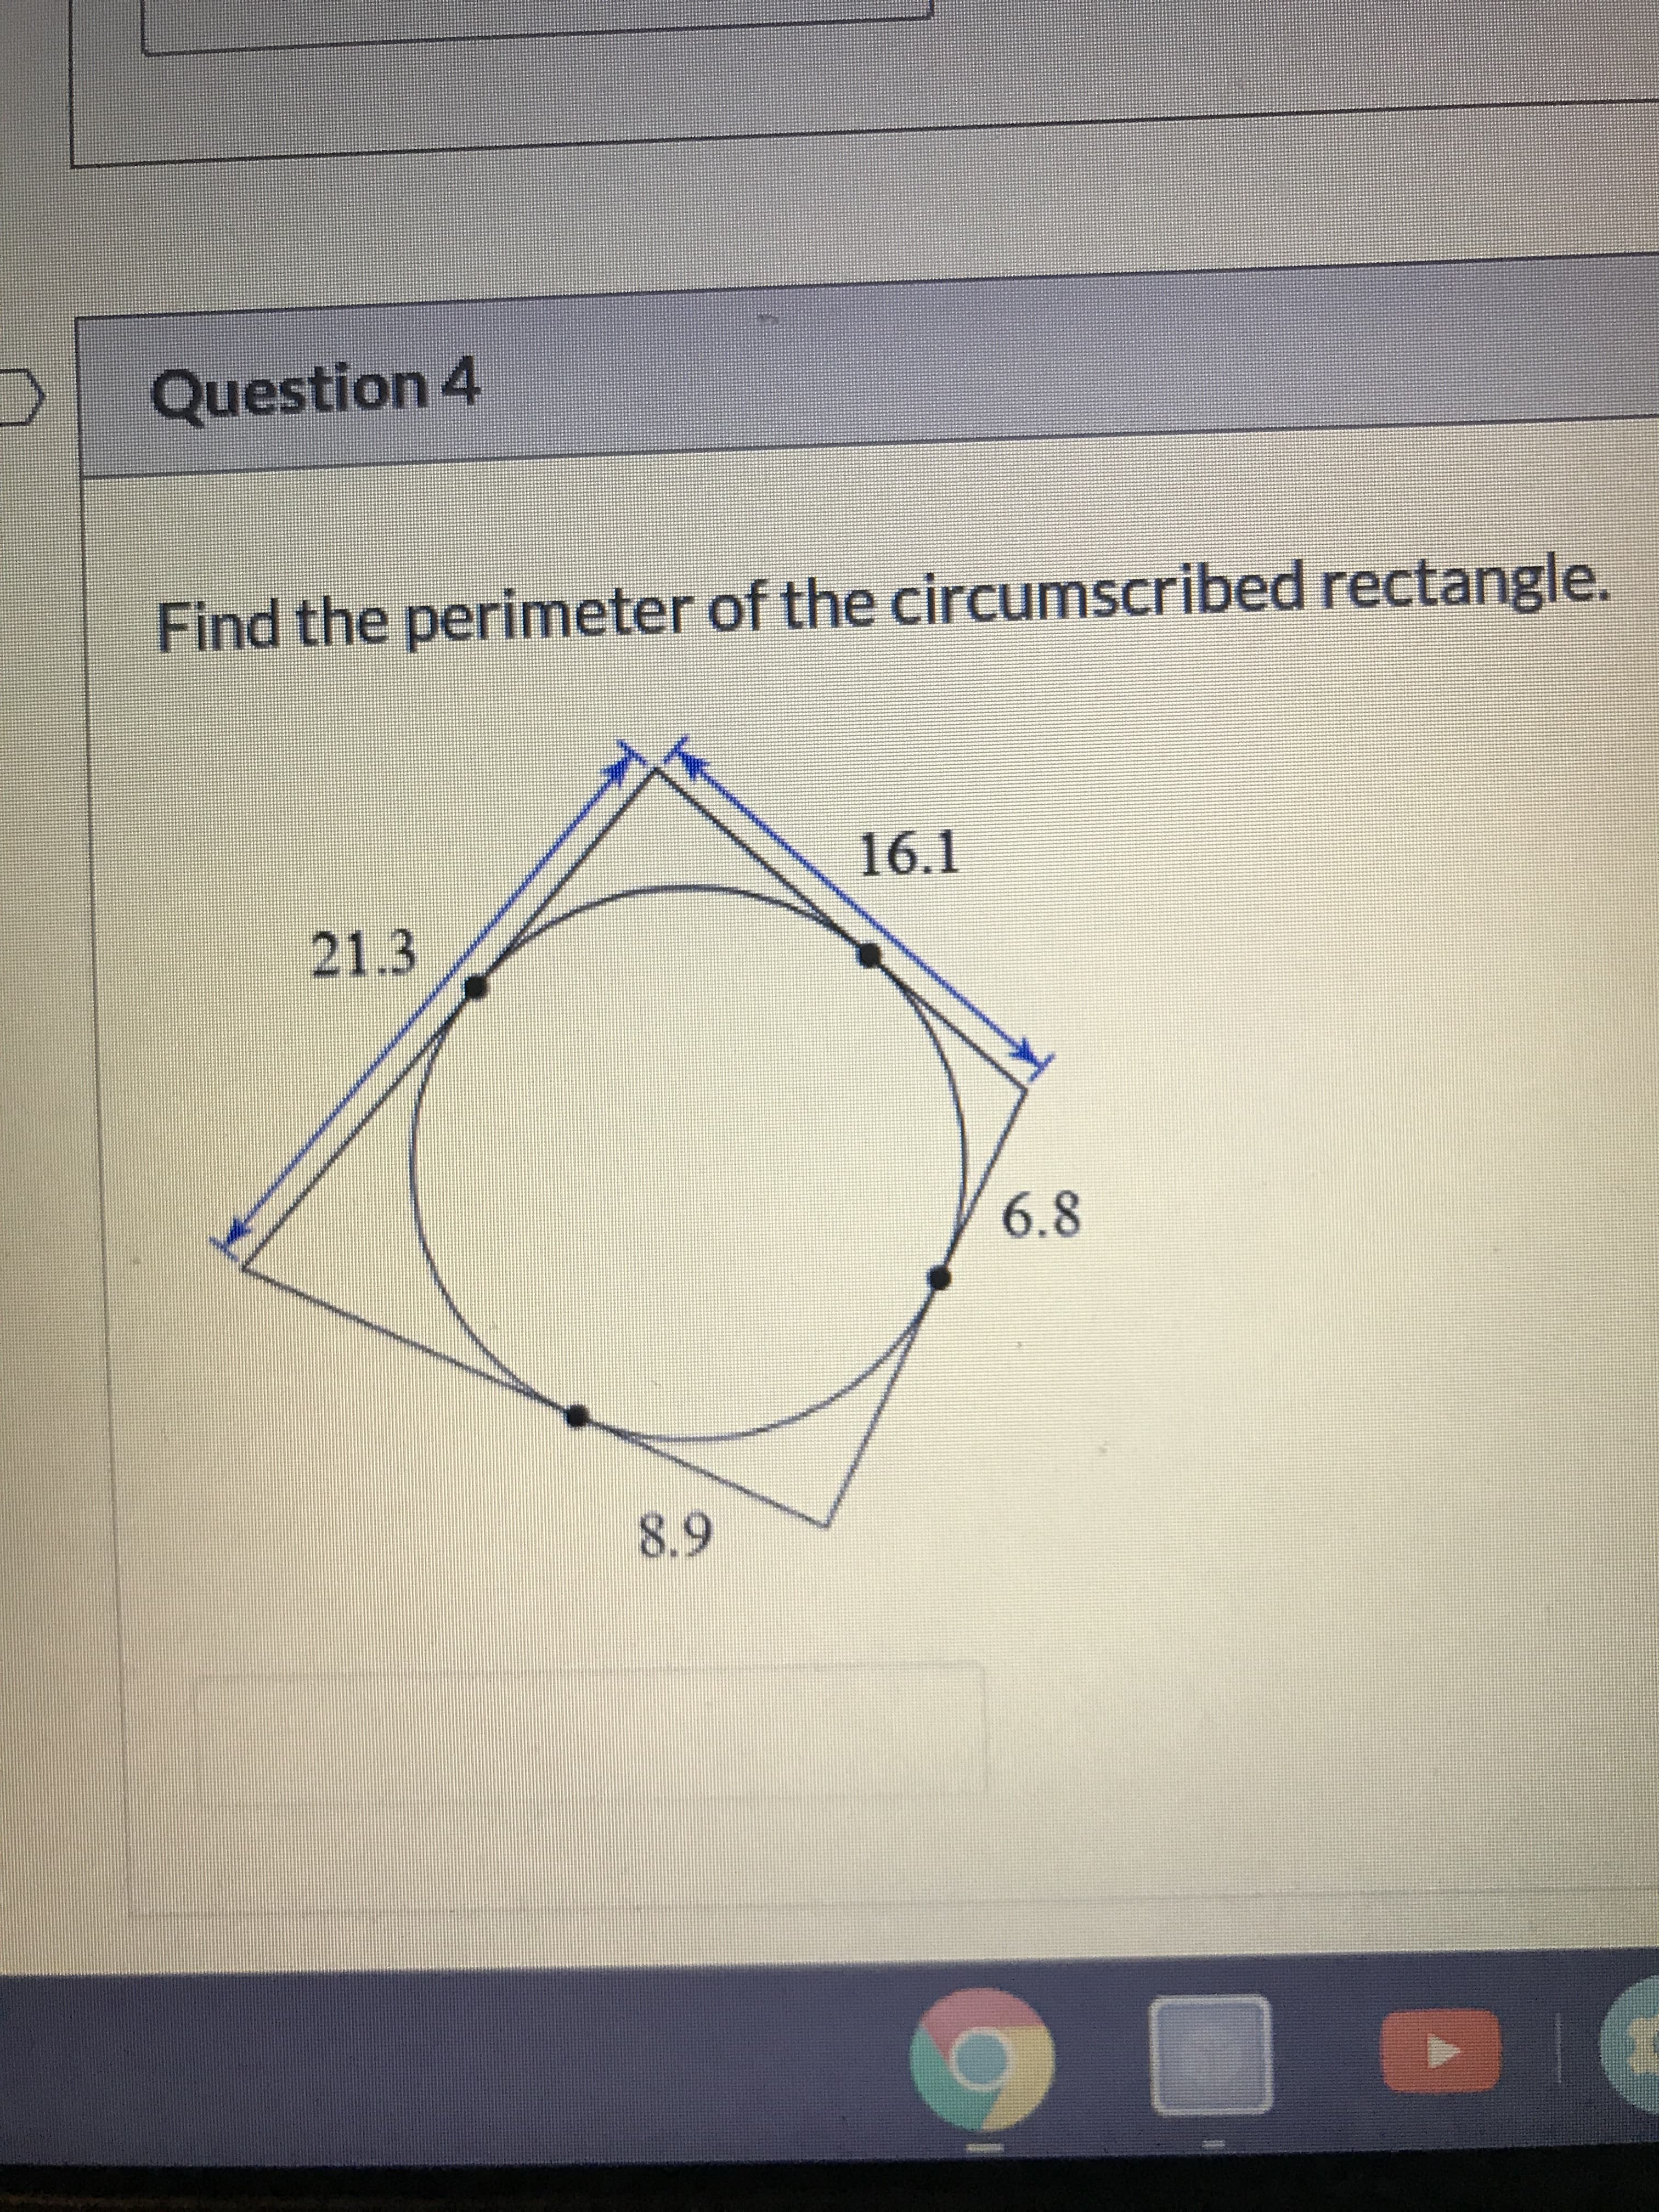 Question 4
Find the perimeter of the circumscribed rectangle.
16.1
21.3
6.8
8.9
